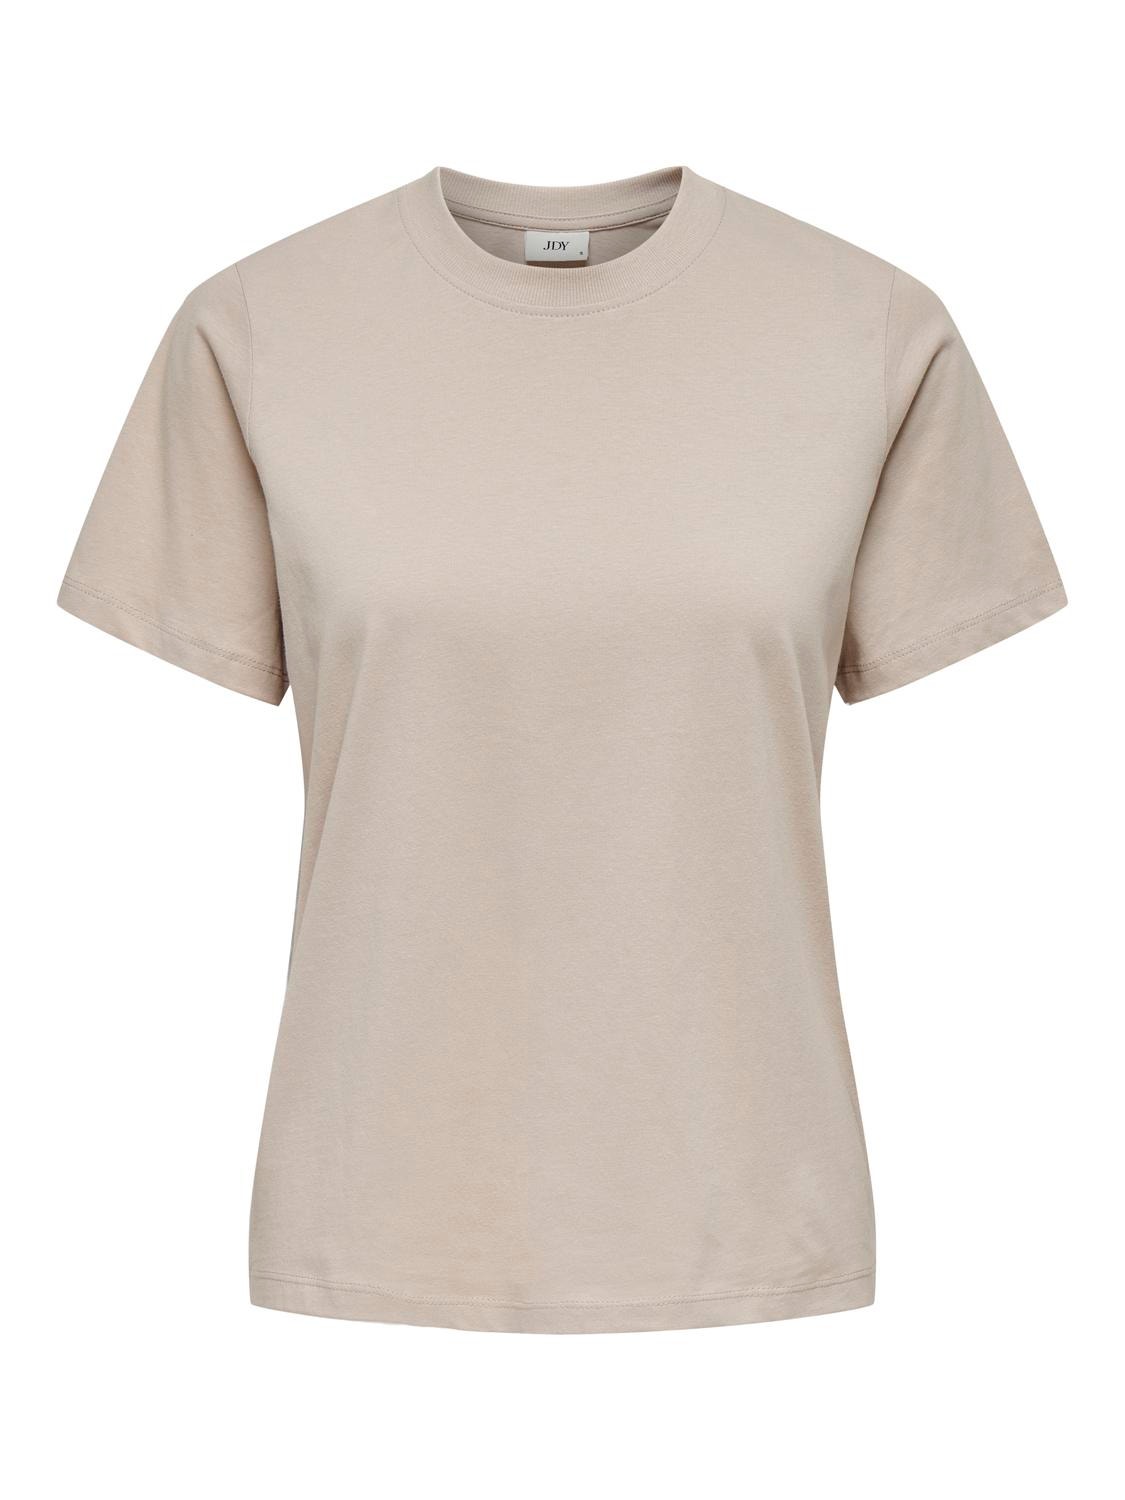 ONLY Regular Fit Round Neck T-Shirt -Chateau Gray - 15292431